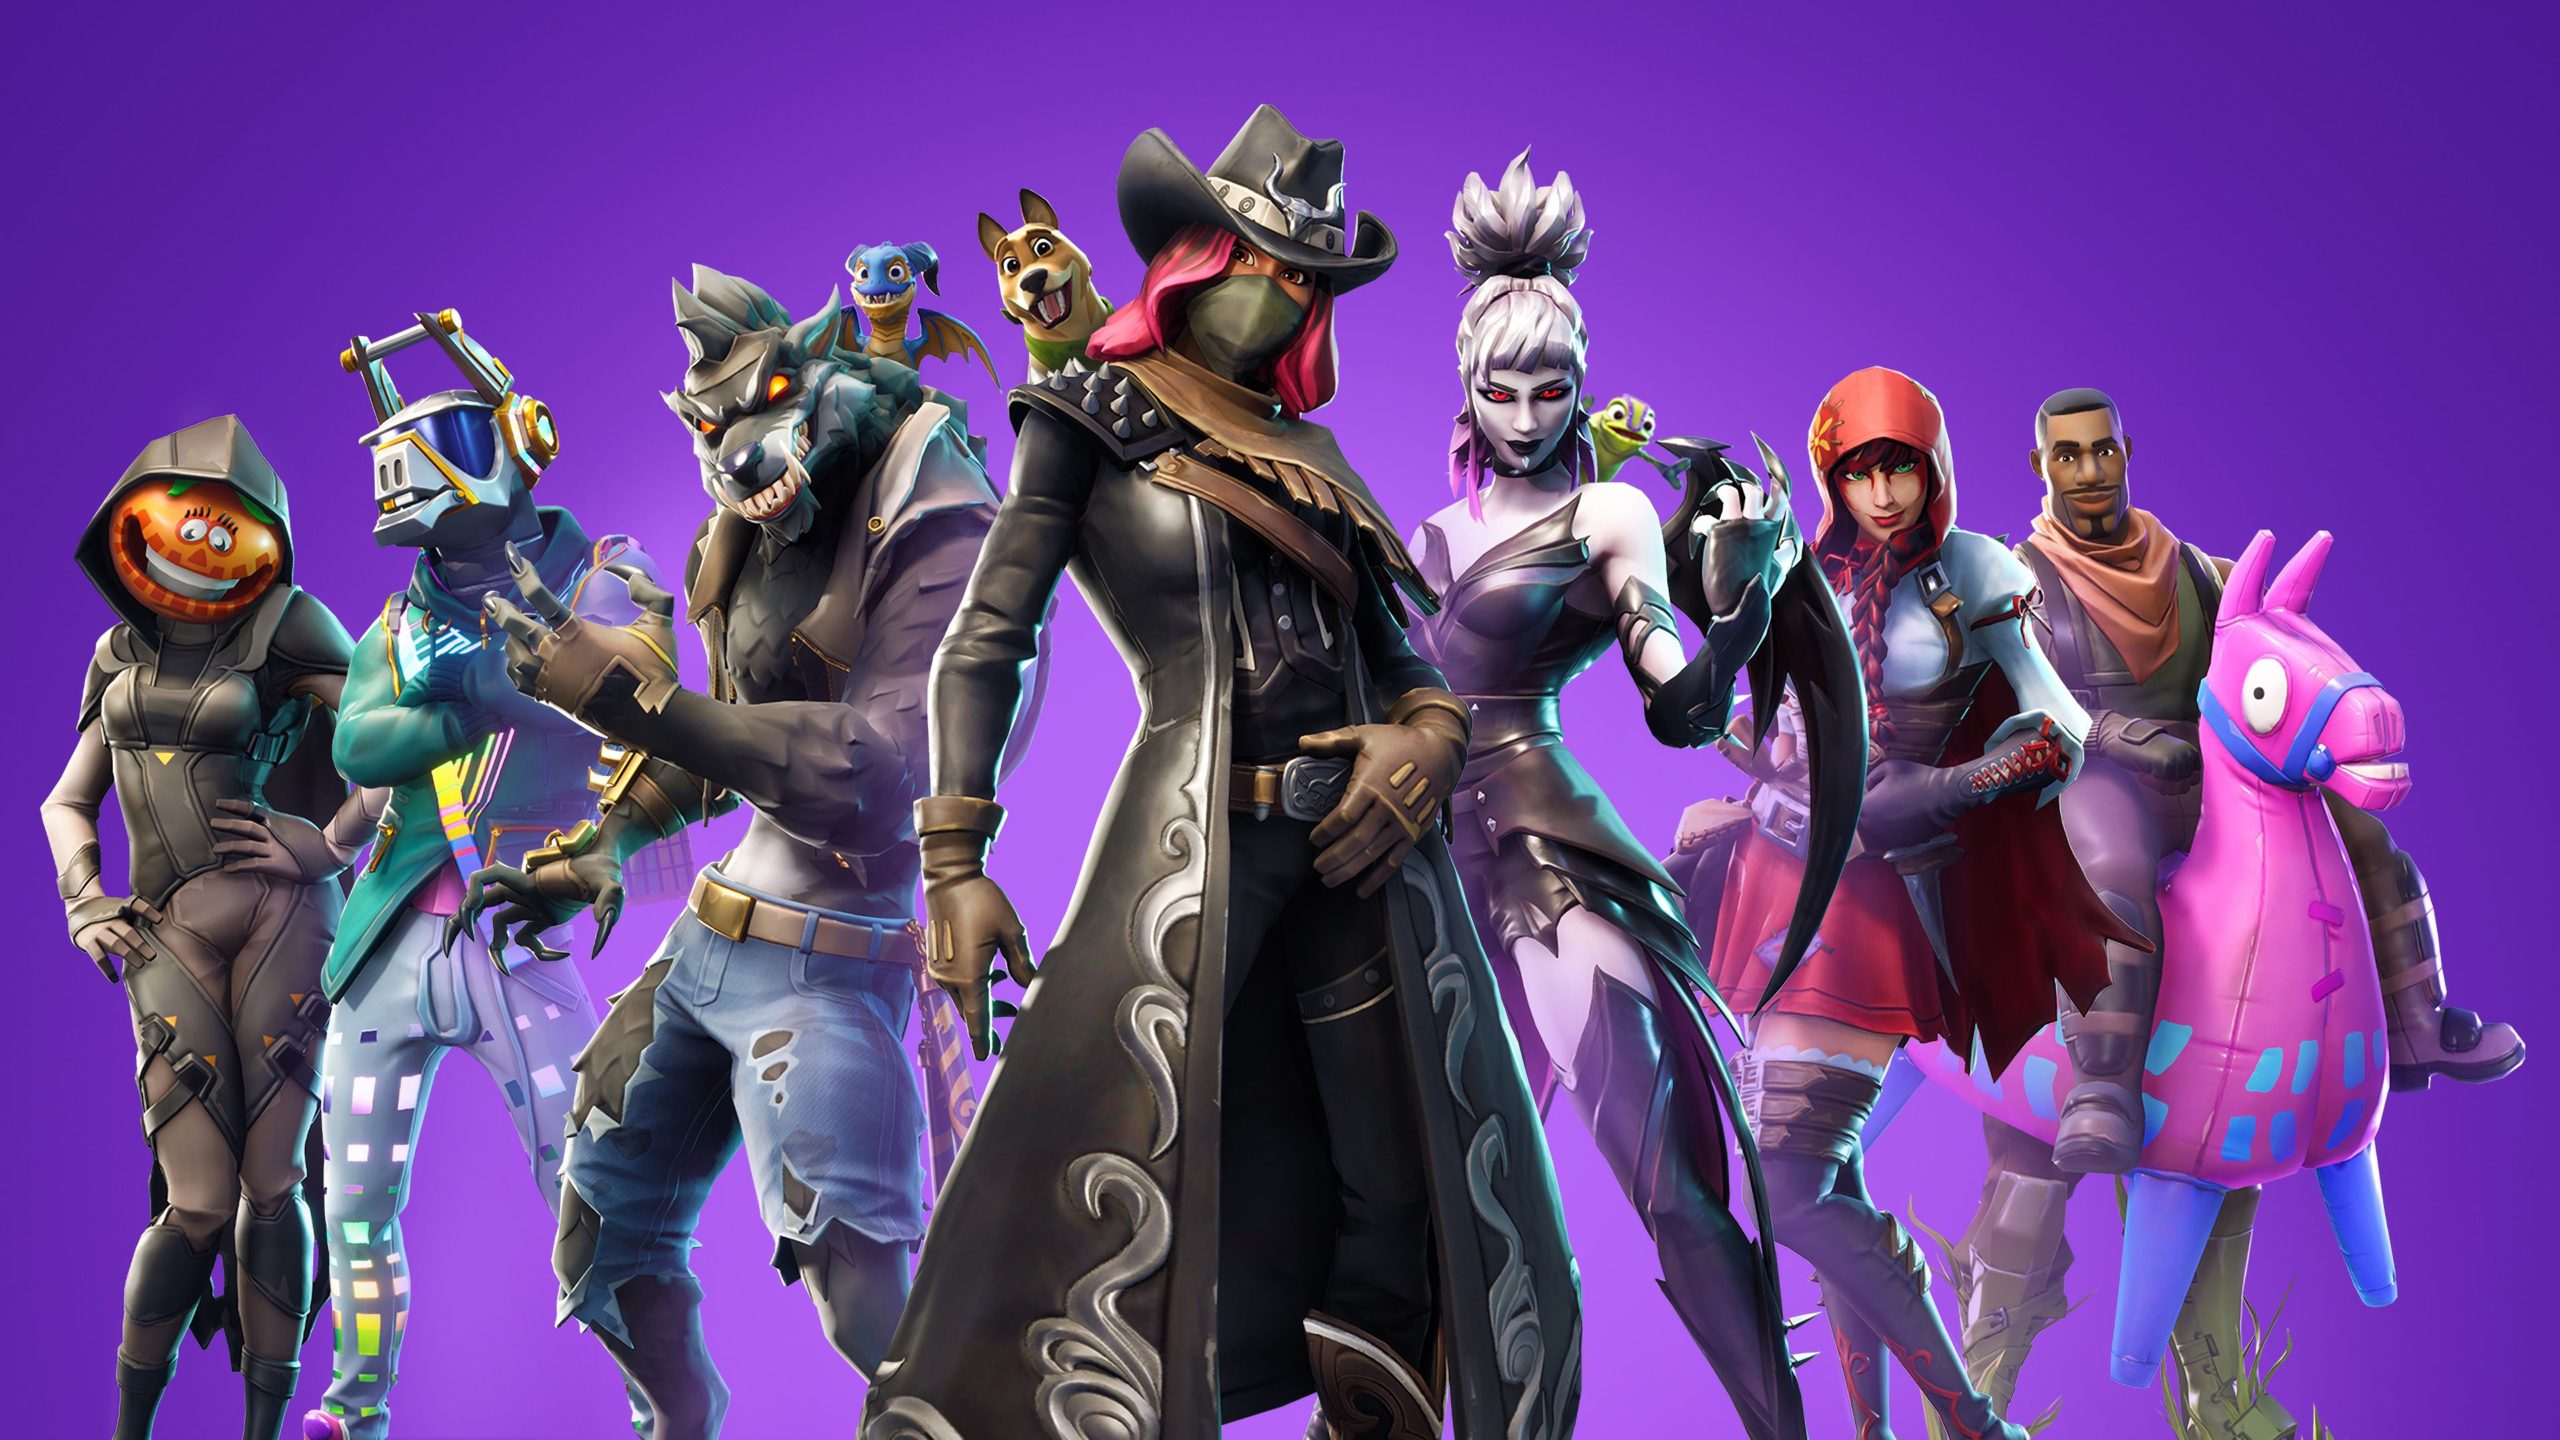 1389241 Fortnite, Video Game - Rare Gallery HD Wallpapers